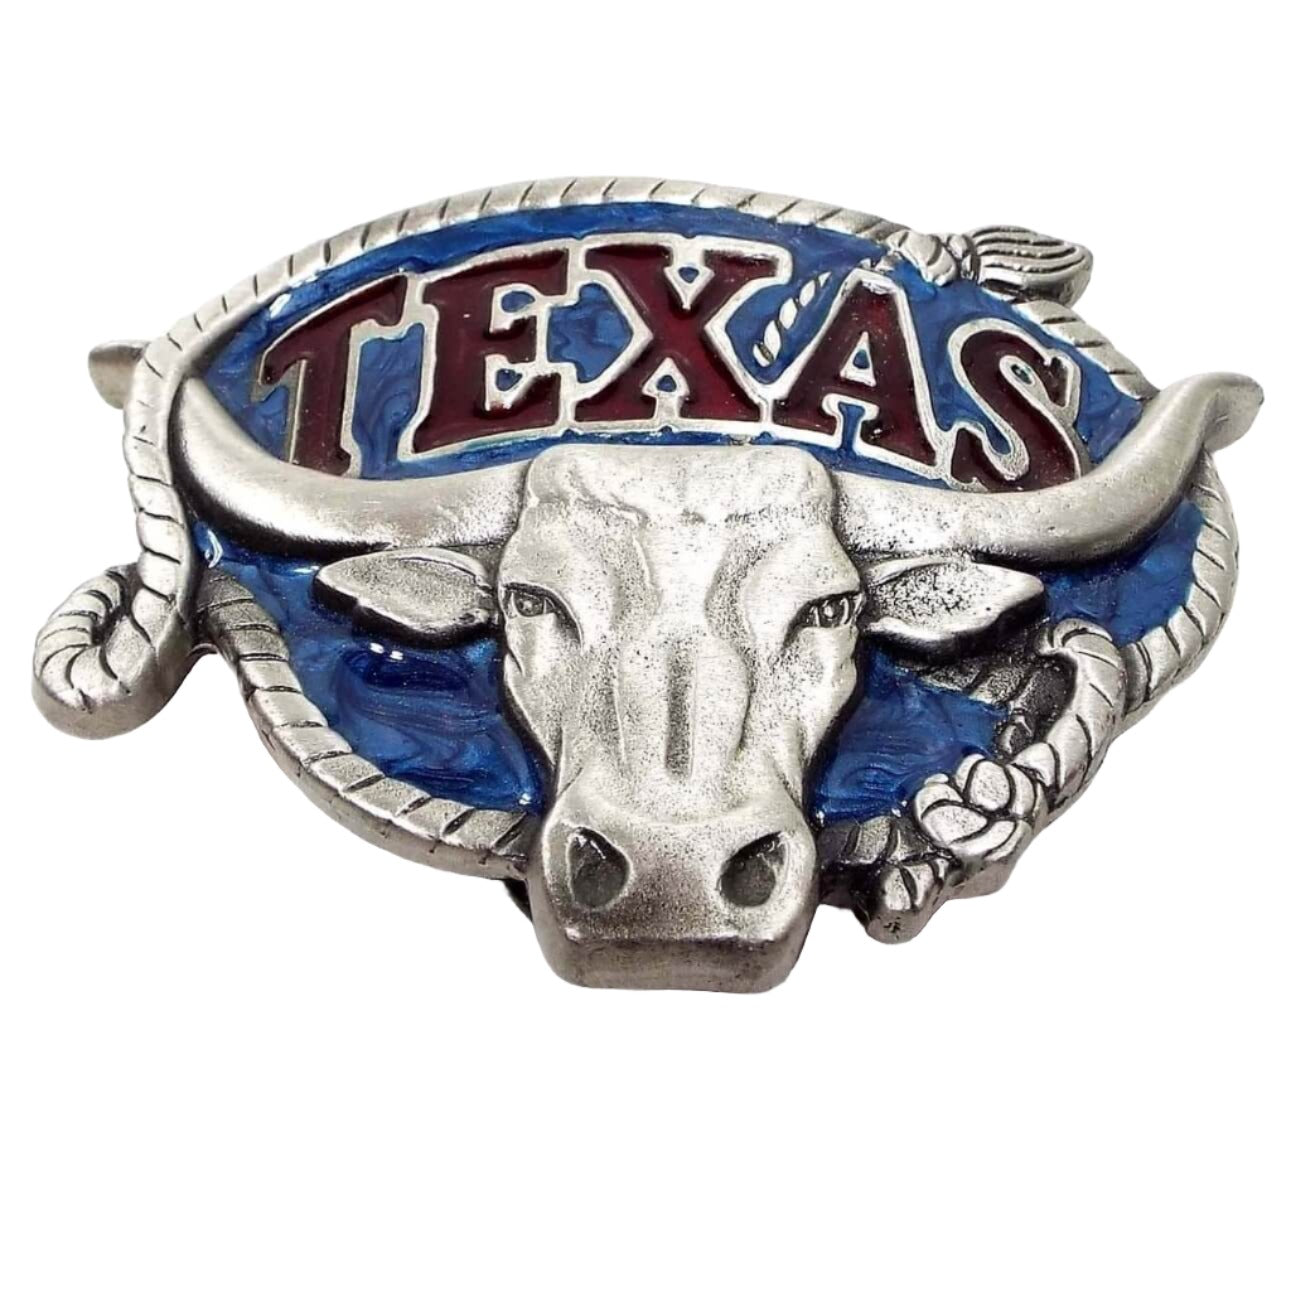 Front view of the retro vintage Texas belt buckle by Great American Buckle Company. It is light pewter gray in color with blue enamel back ground,. There is a steer on the front and the edge has a rope design. It has Texas at the top in red enamel. 